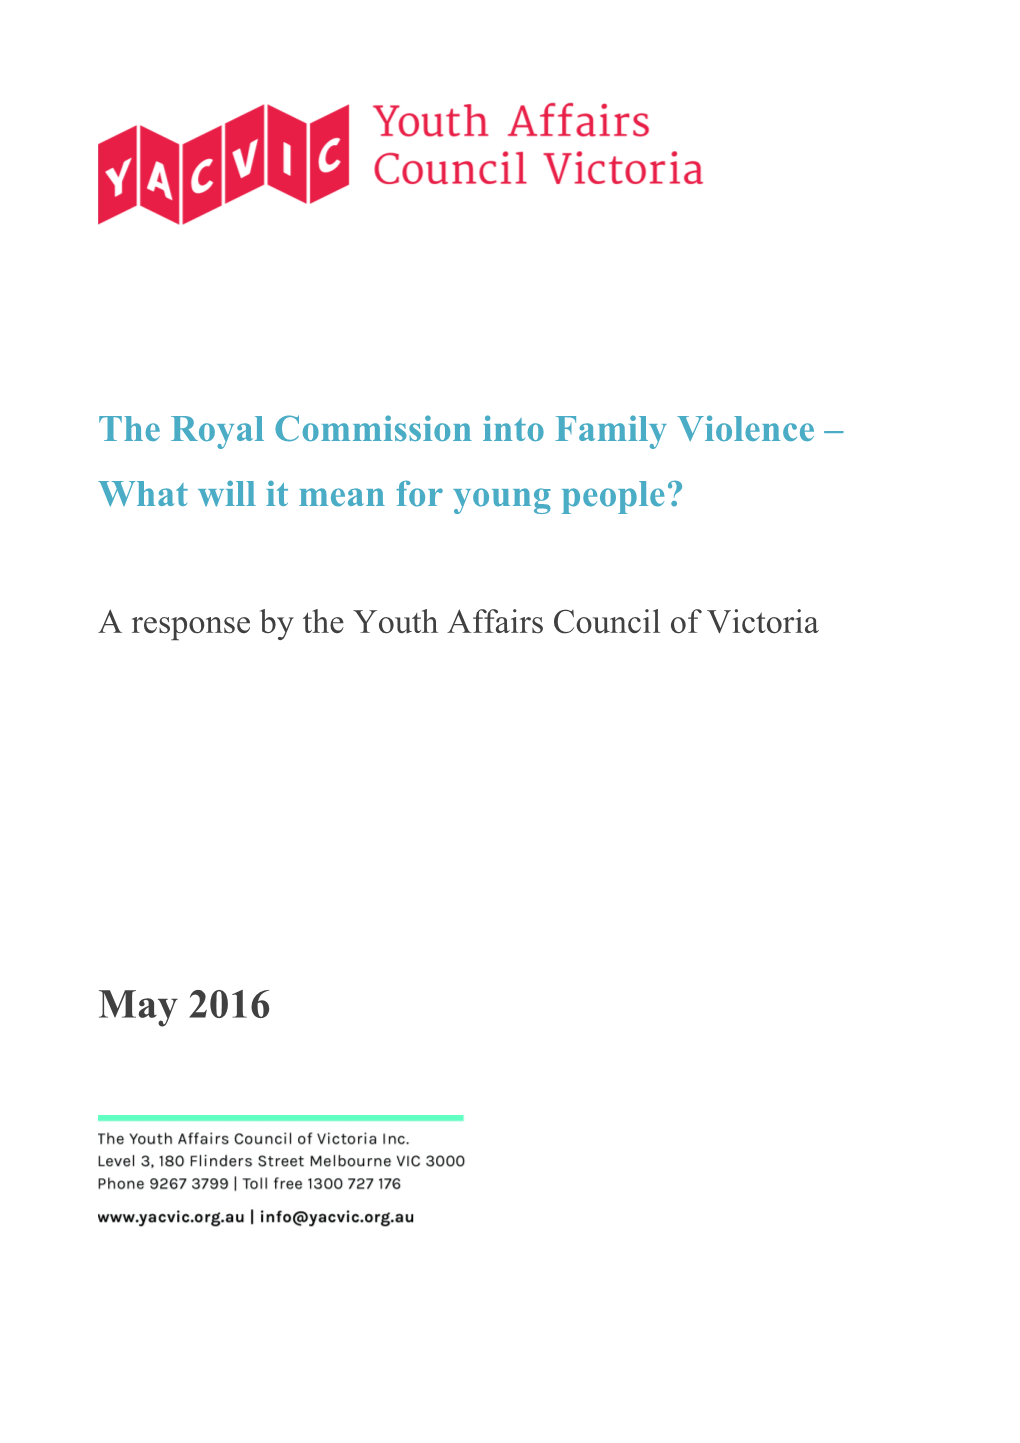 The Royal Commission Into Family Violence